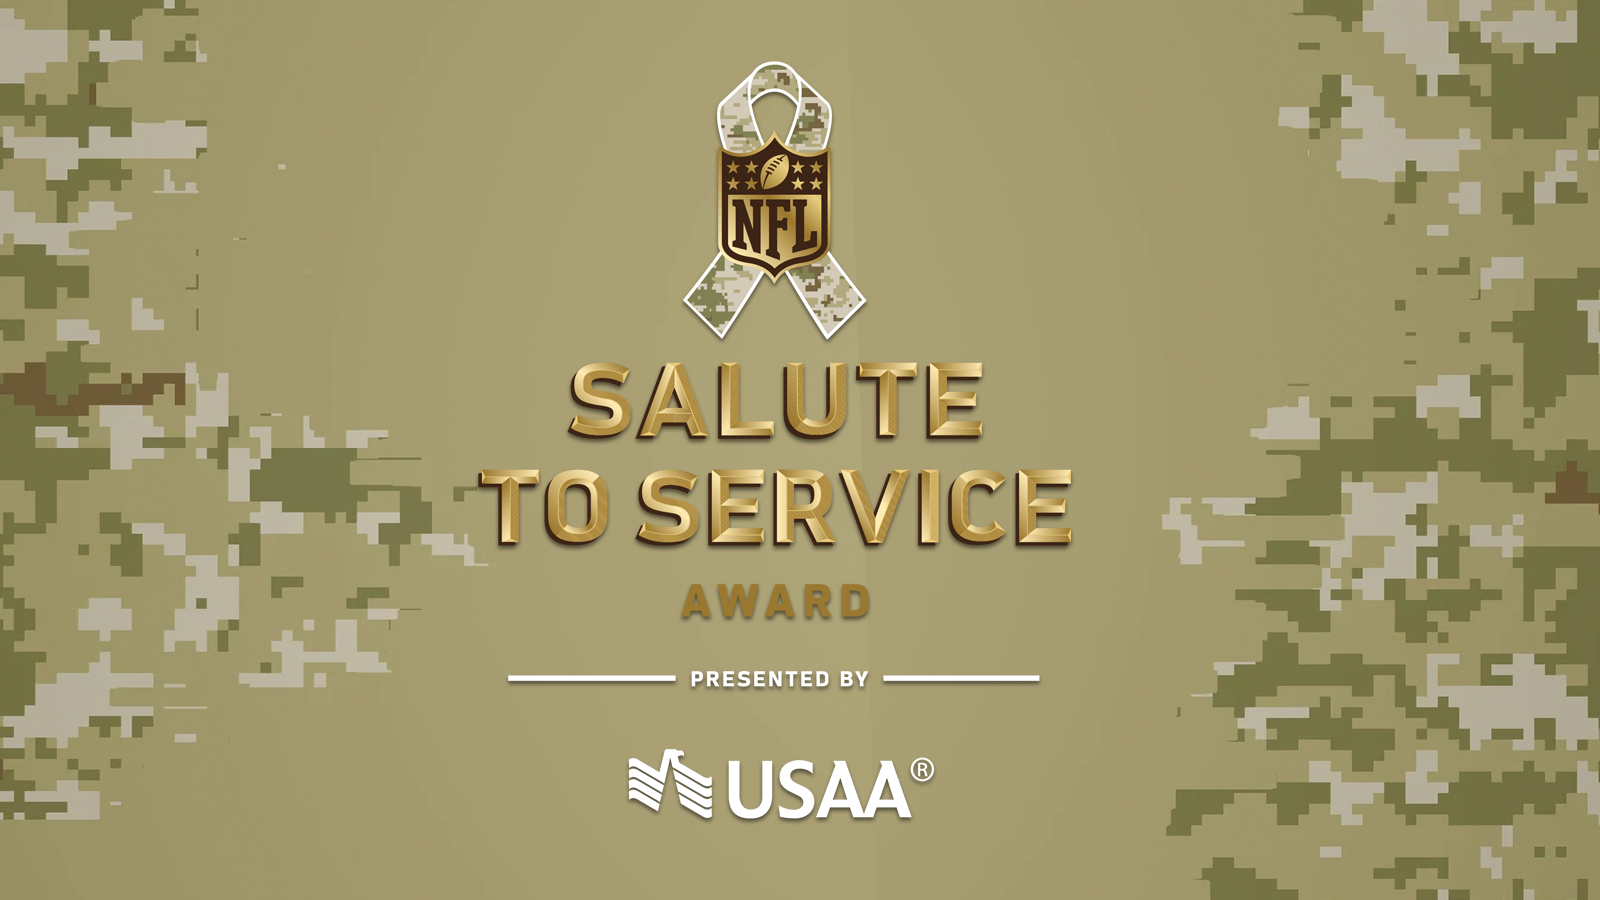 NFL Salute to Service Initiative: How the NFL honors the US